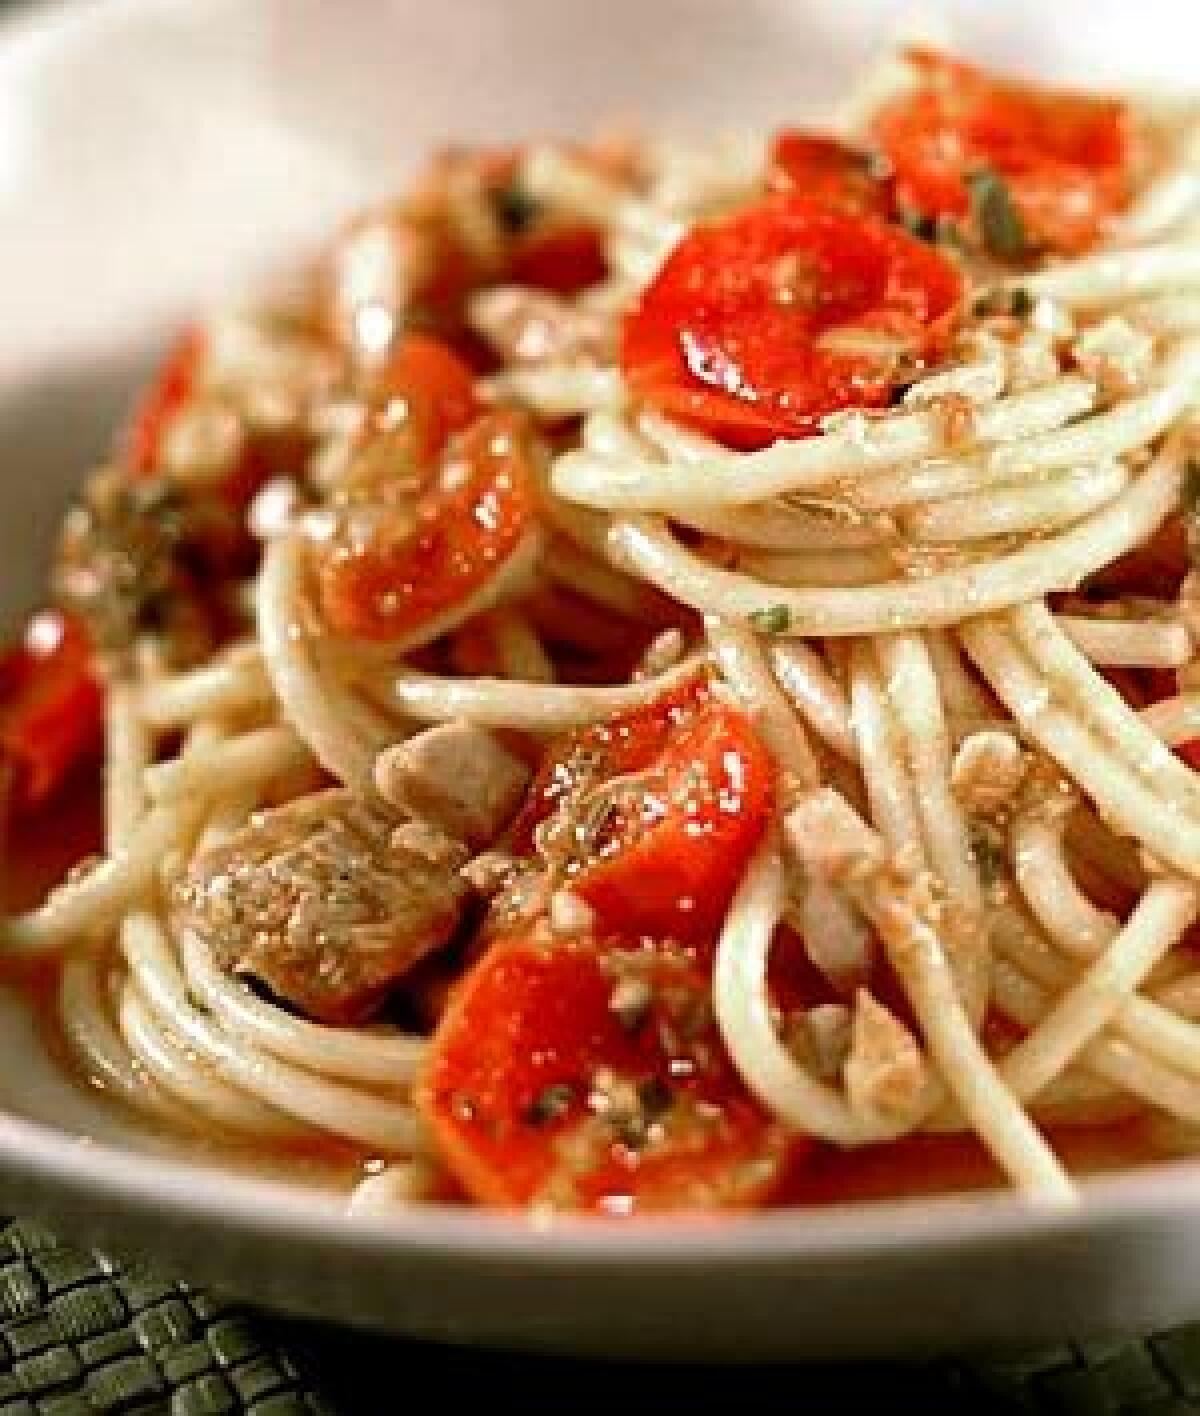 FROM 2008: Spaghetti with tuna and cherry tomatoes. Click here for the recipe.